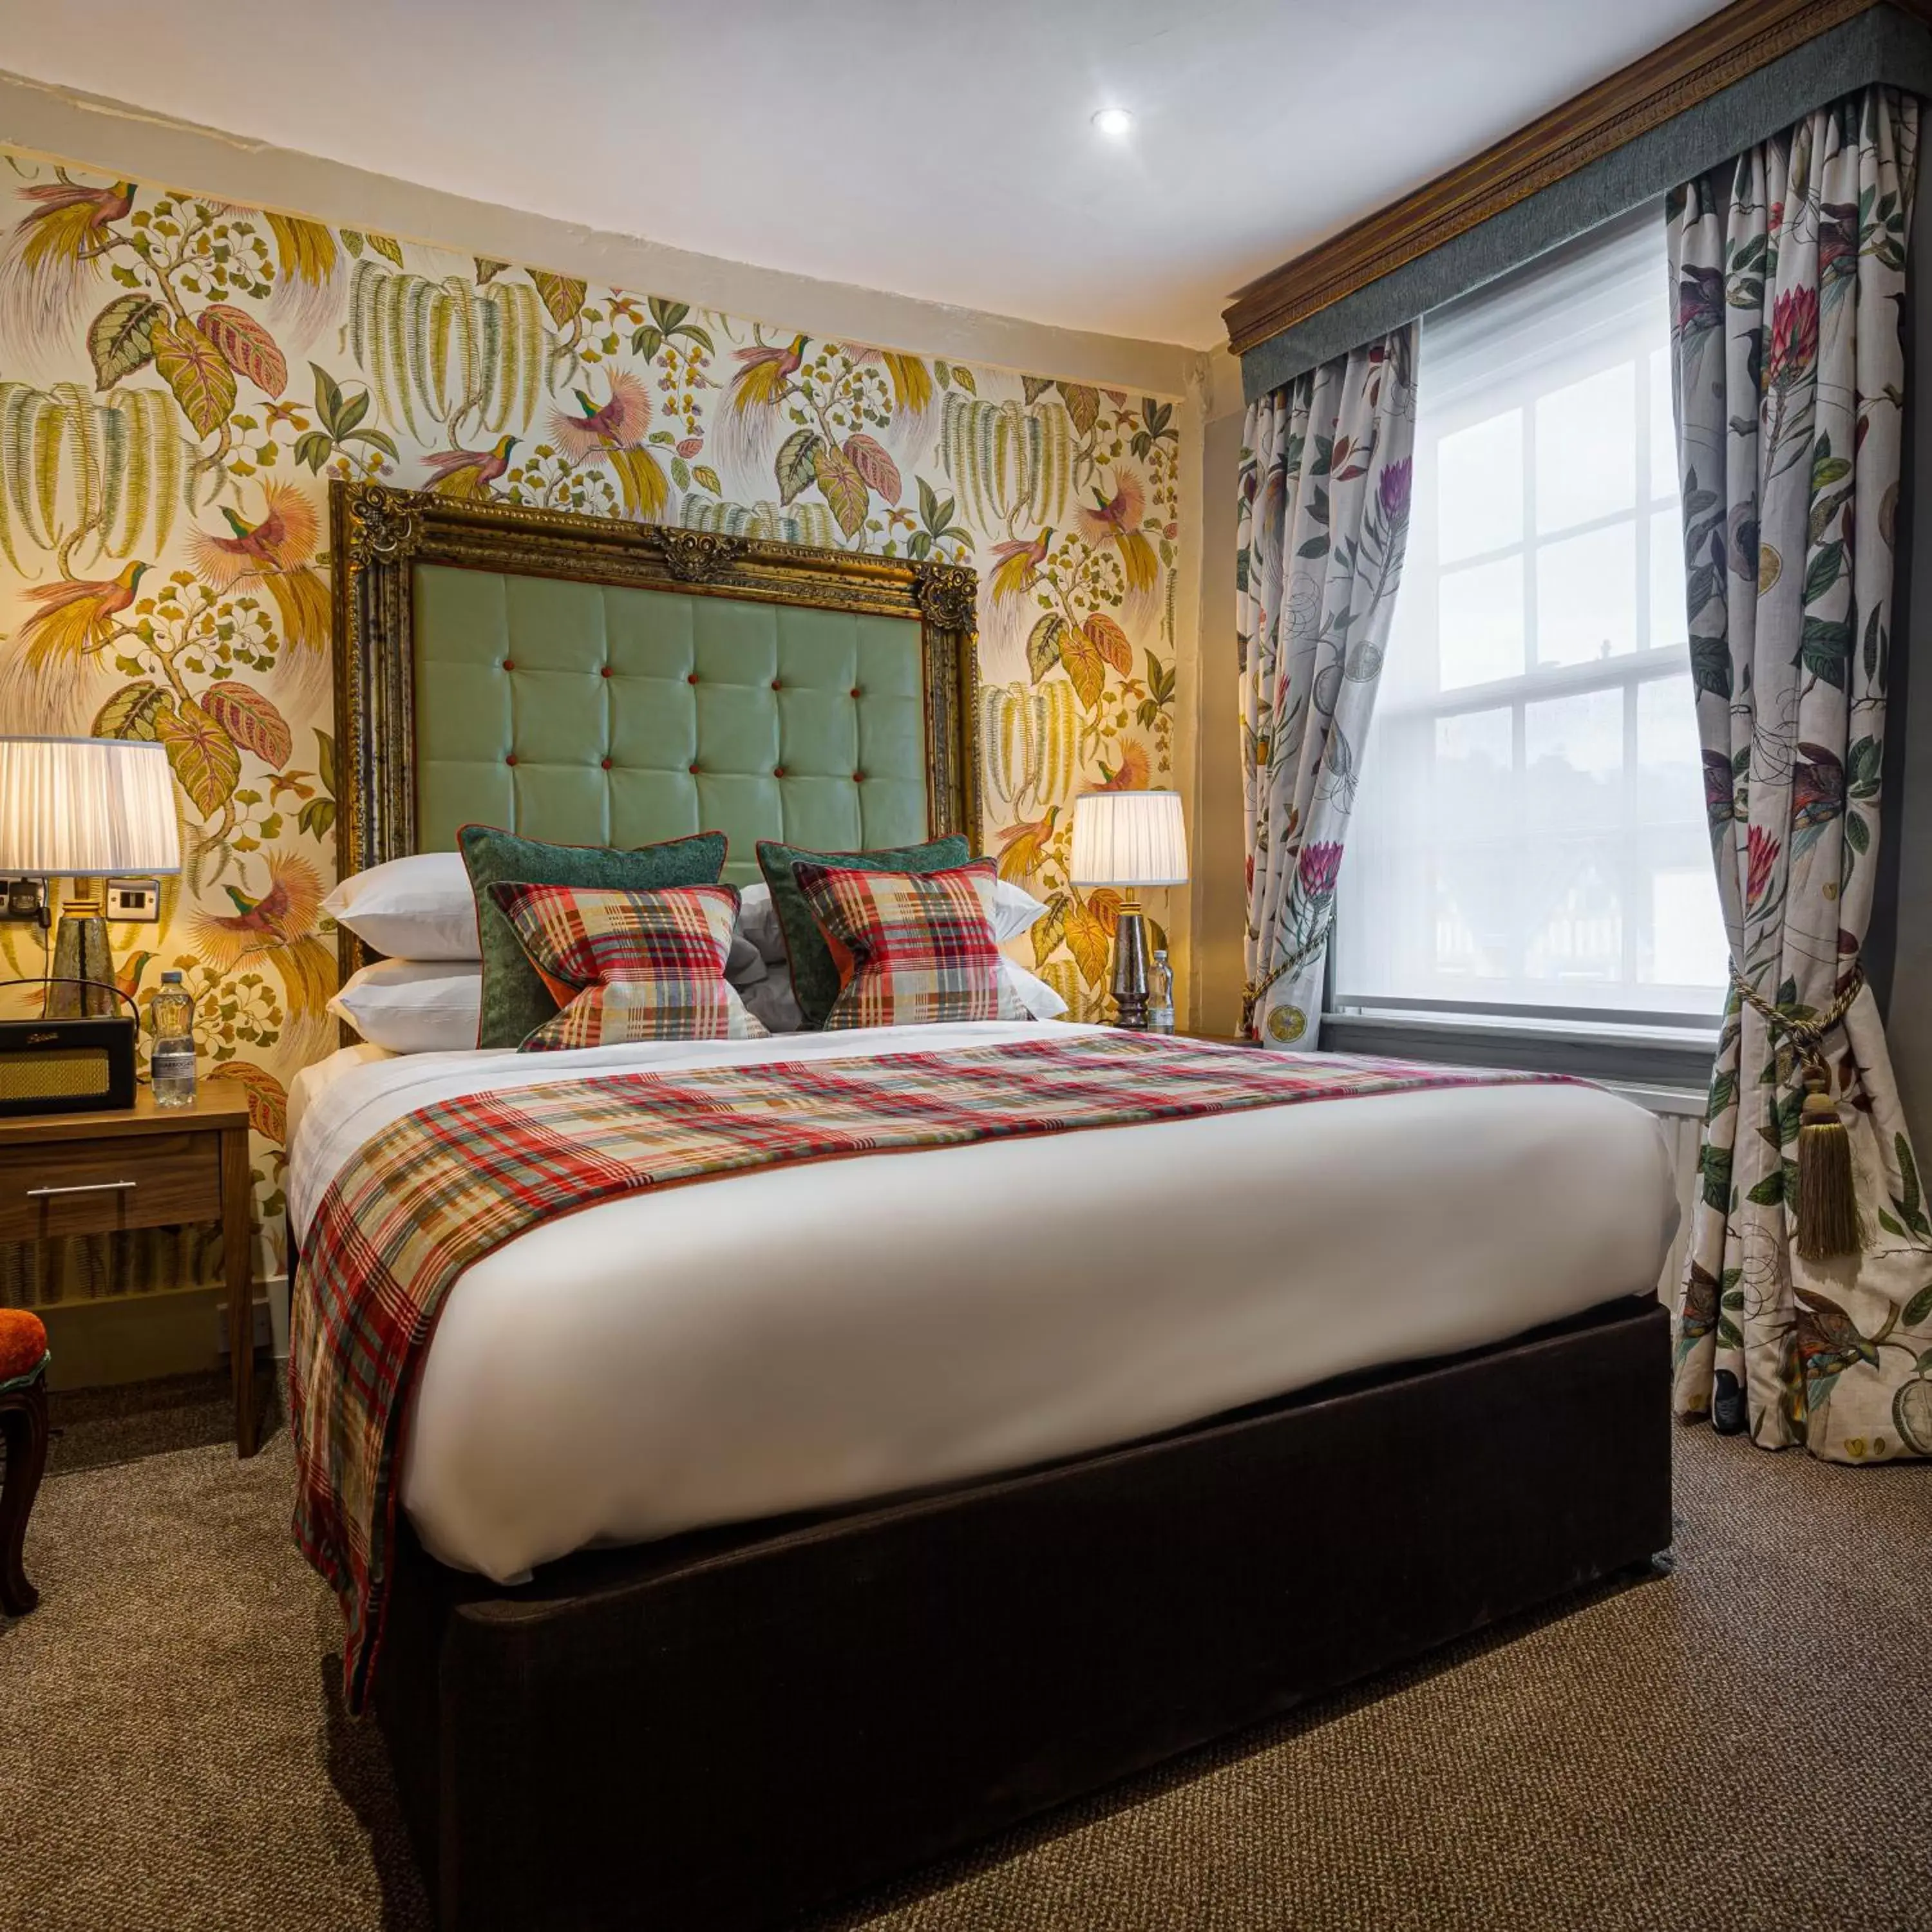 Bedroom in The Feathers Hotel, Ledbury, Herefordshire